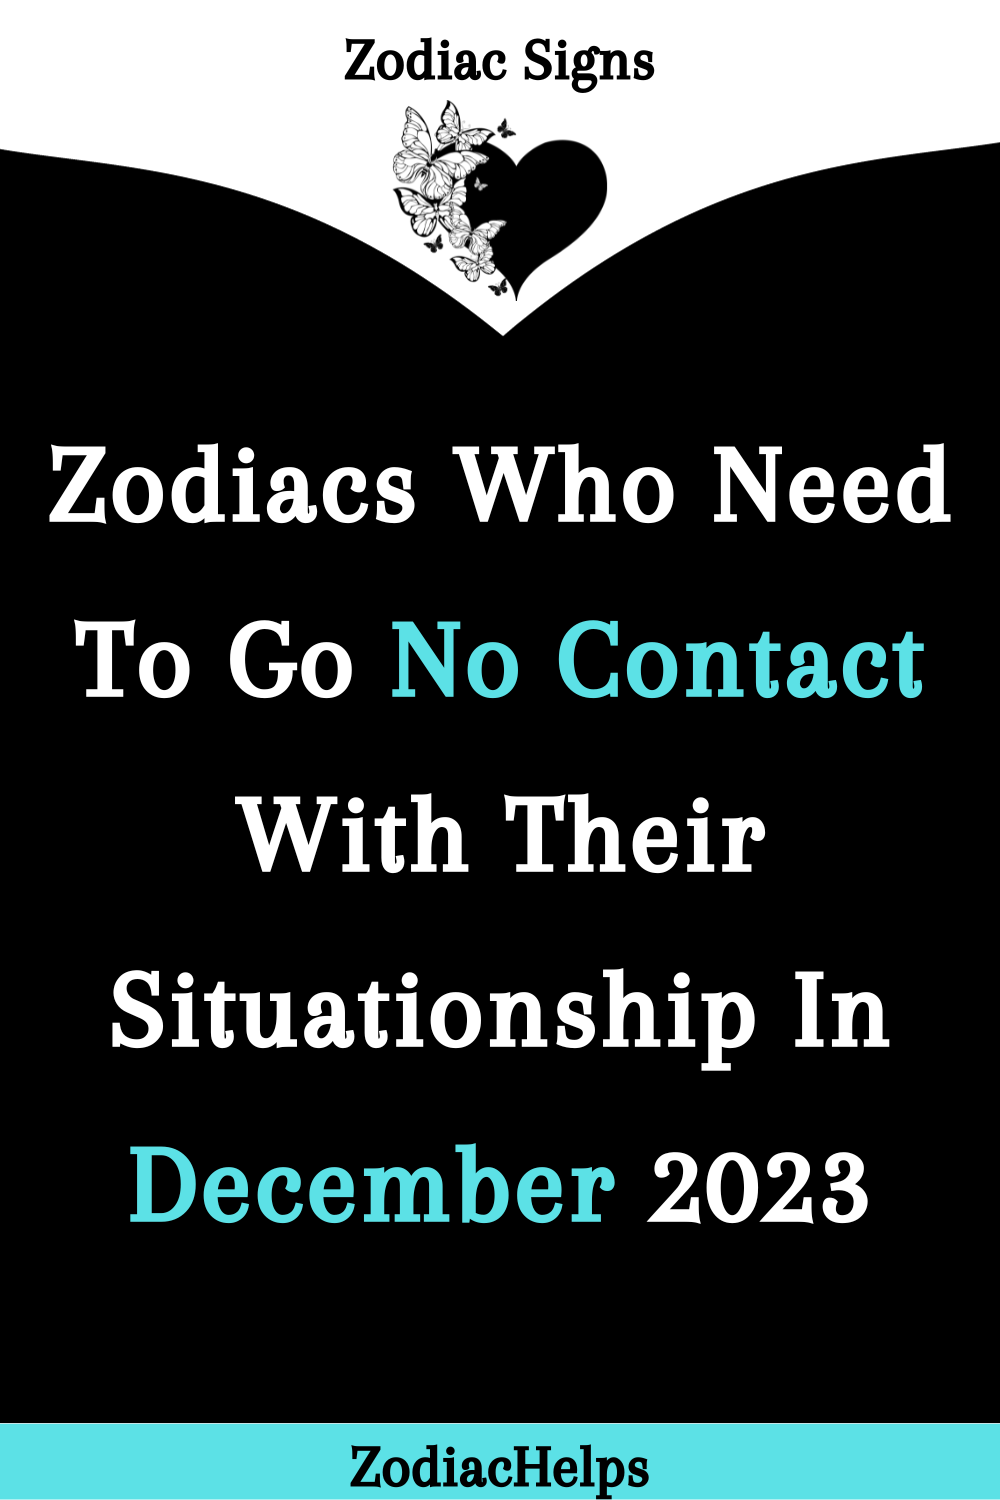 Zodiacs Who Need To Go No Contact With Their Situationship In December 2023